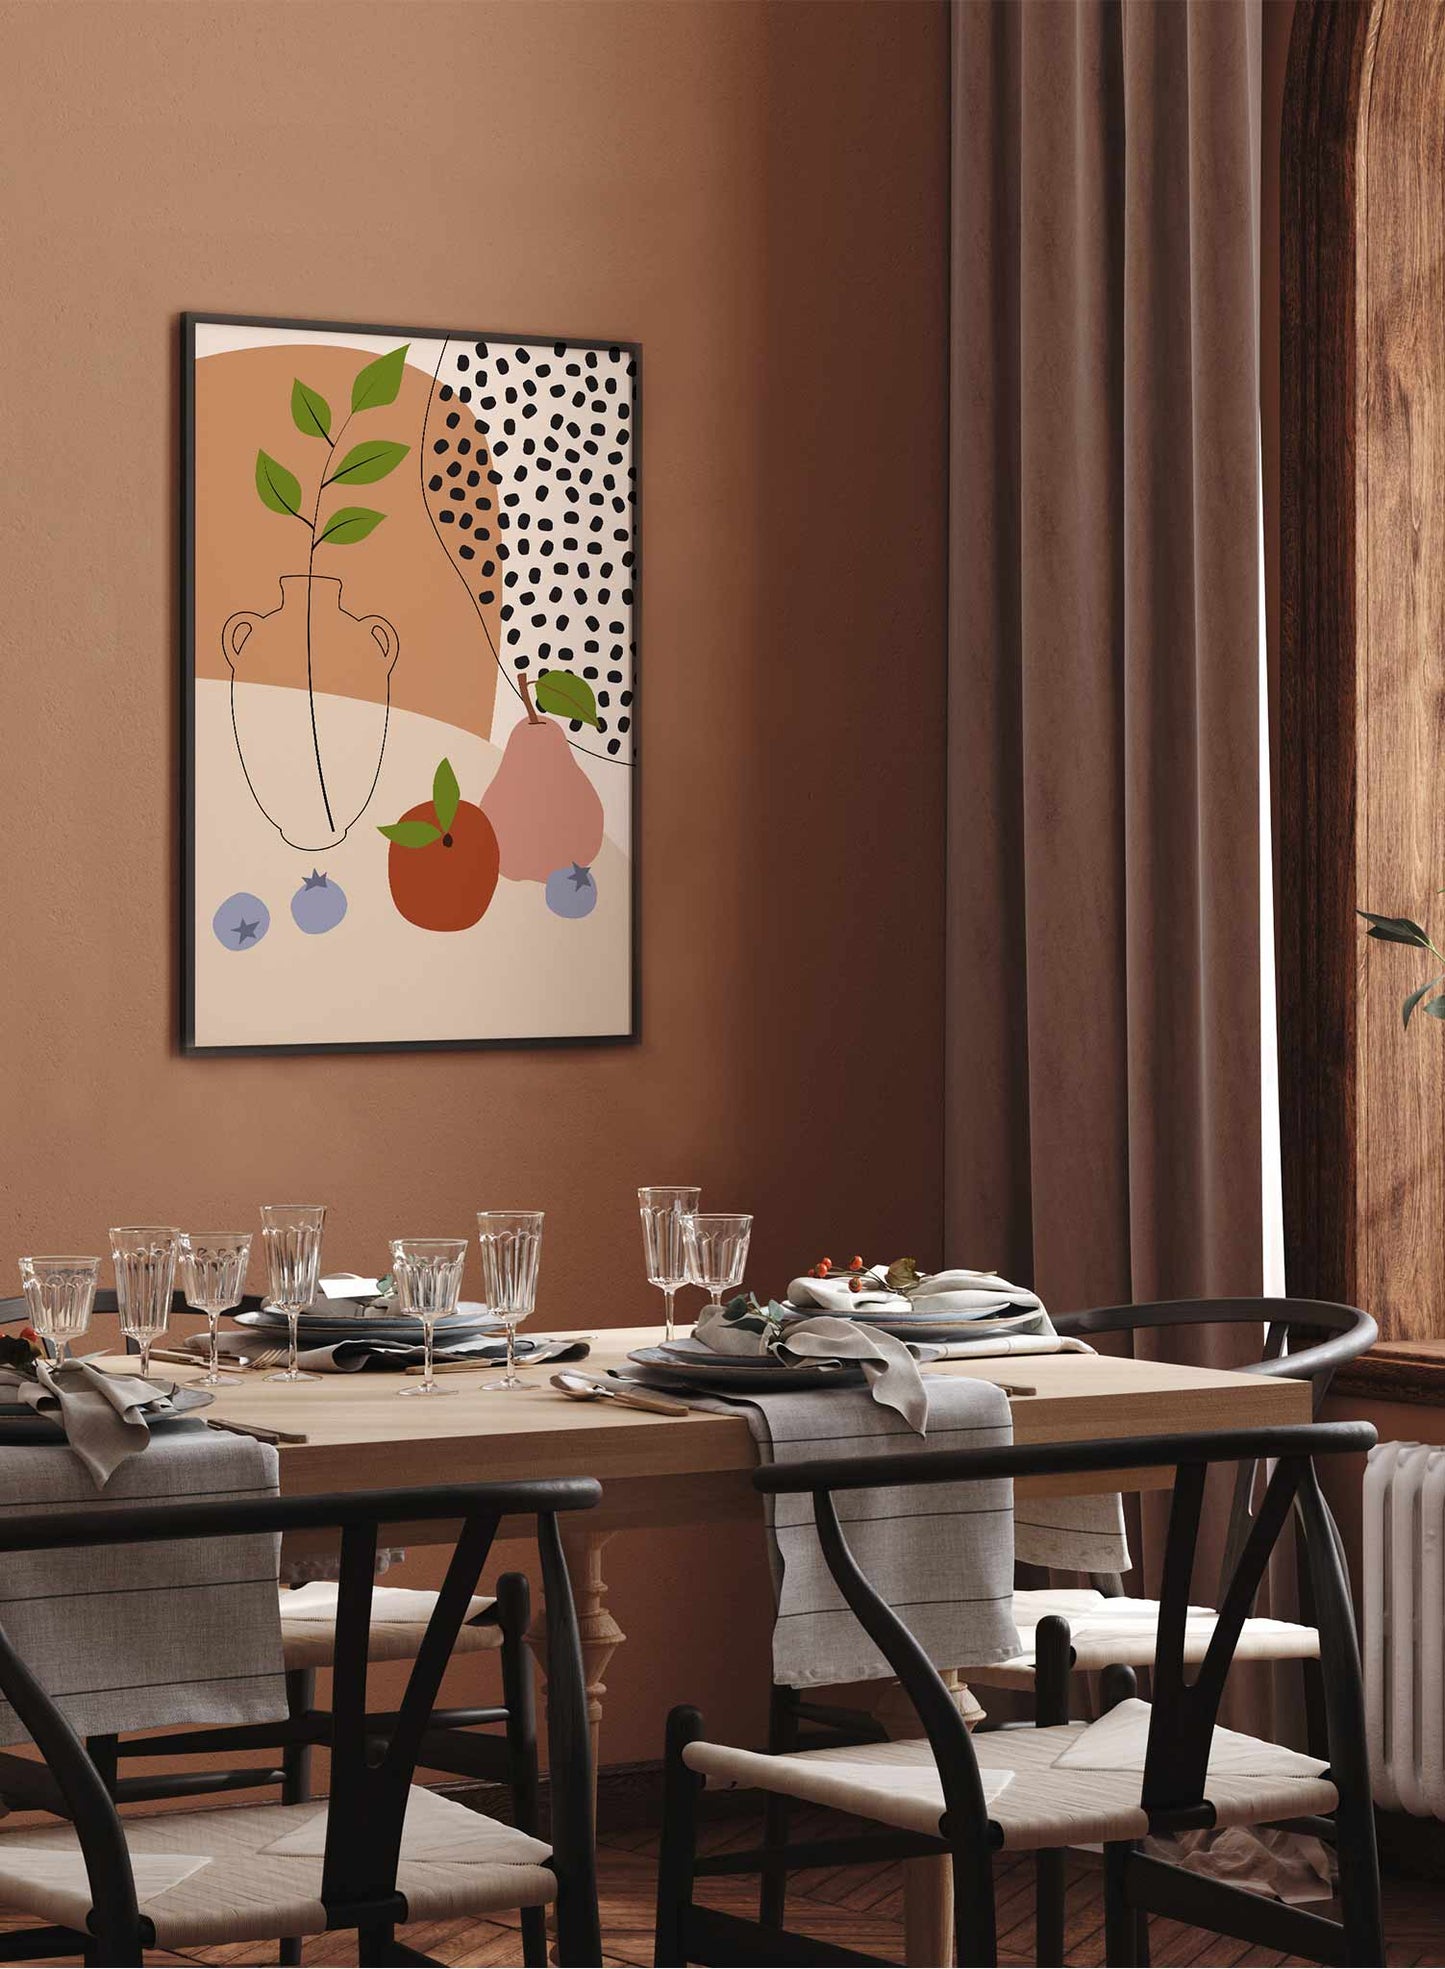 Fruity Harmony is a fruit illustration poster by Opposite Wall.